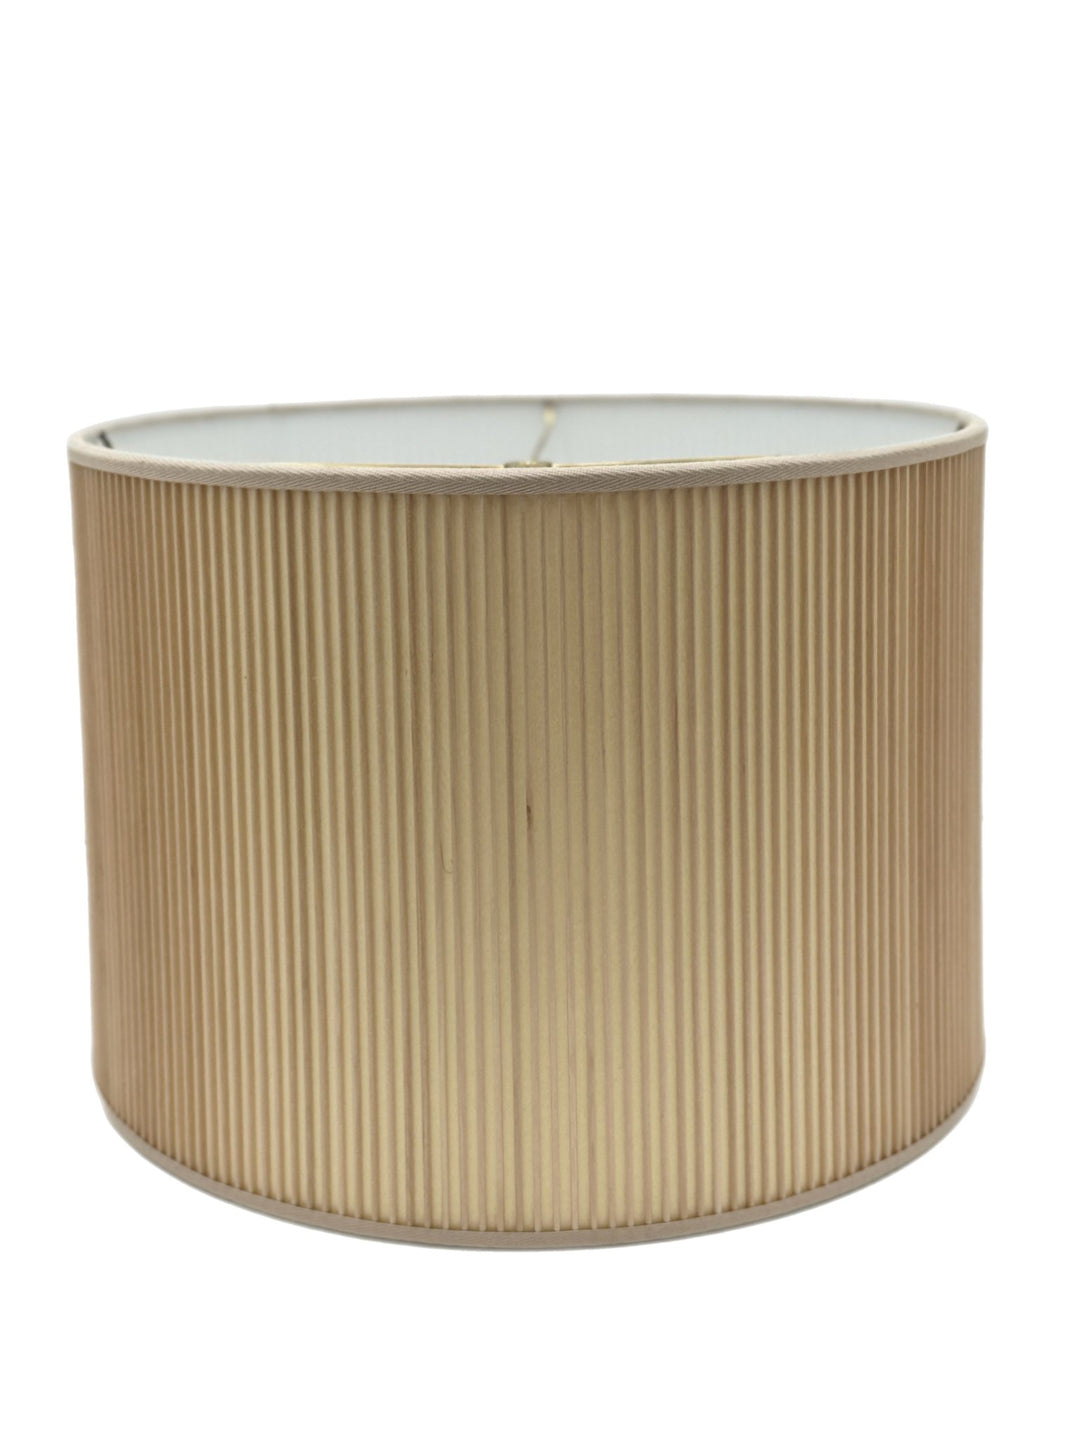 18" Natural Drum Stick Lamp Shade - Lux Lamp Shades